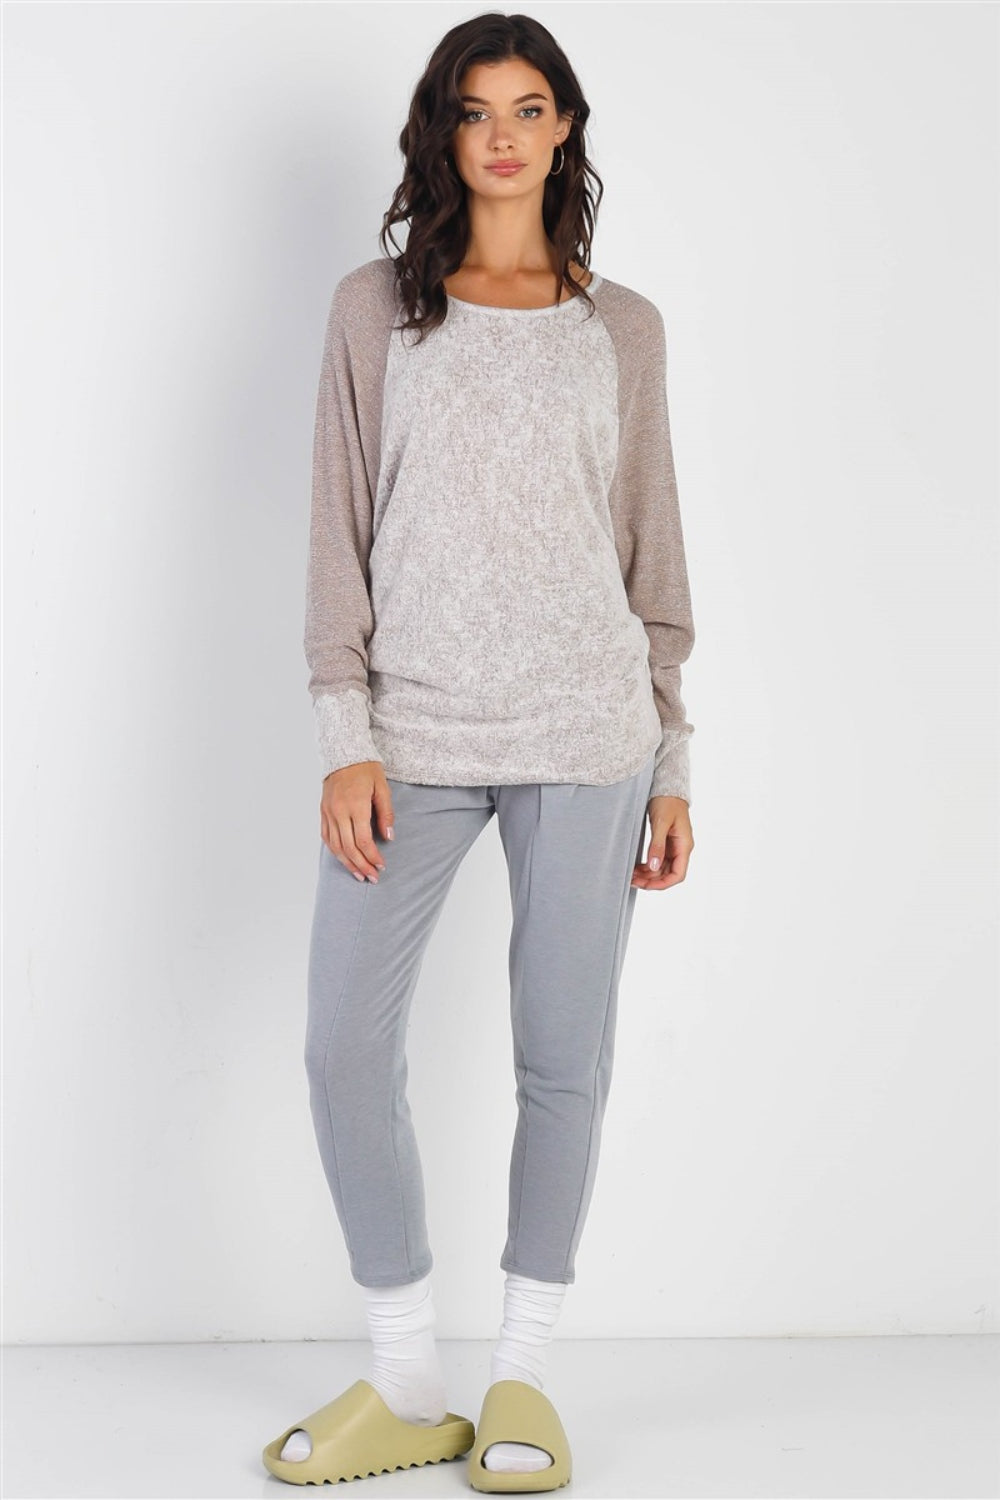 Cherish Apparel Round Neck Long Sleeve Contrast Top [ click for more options]